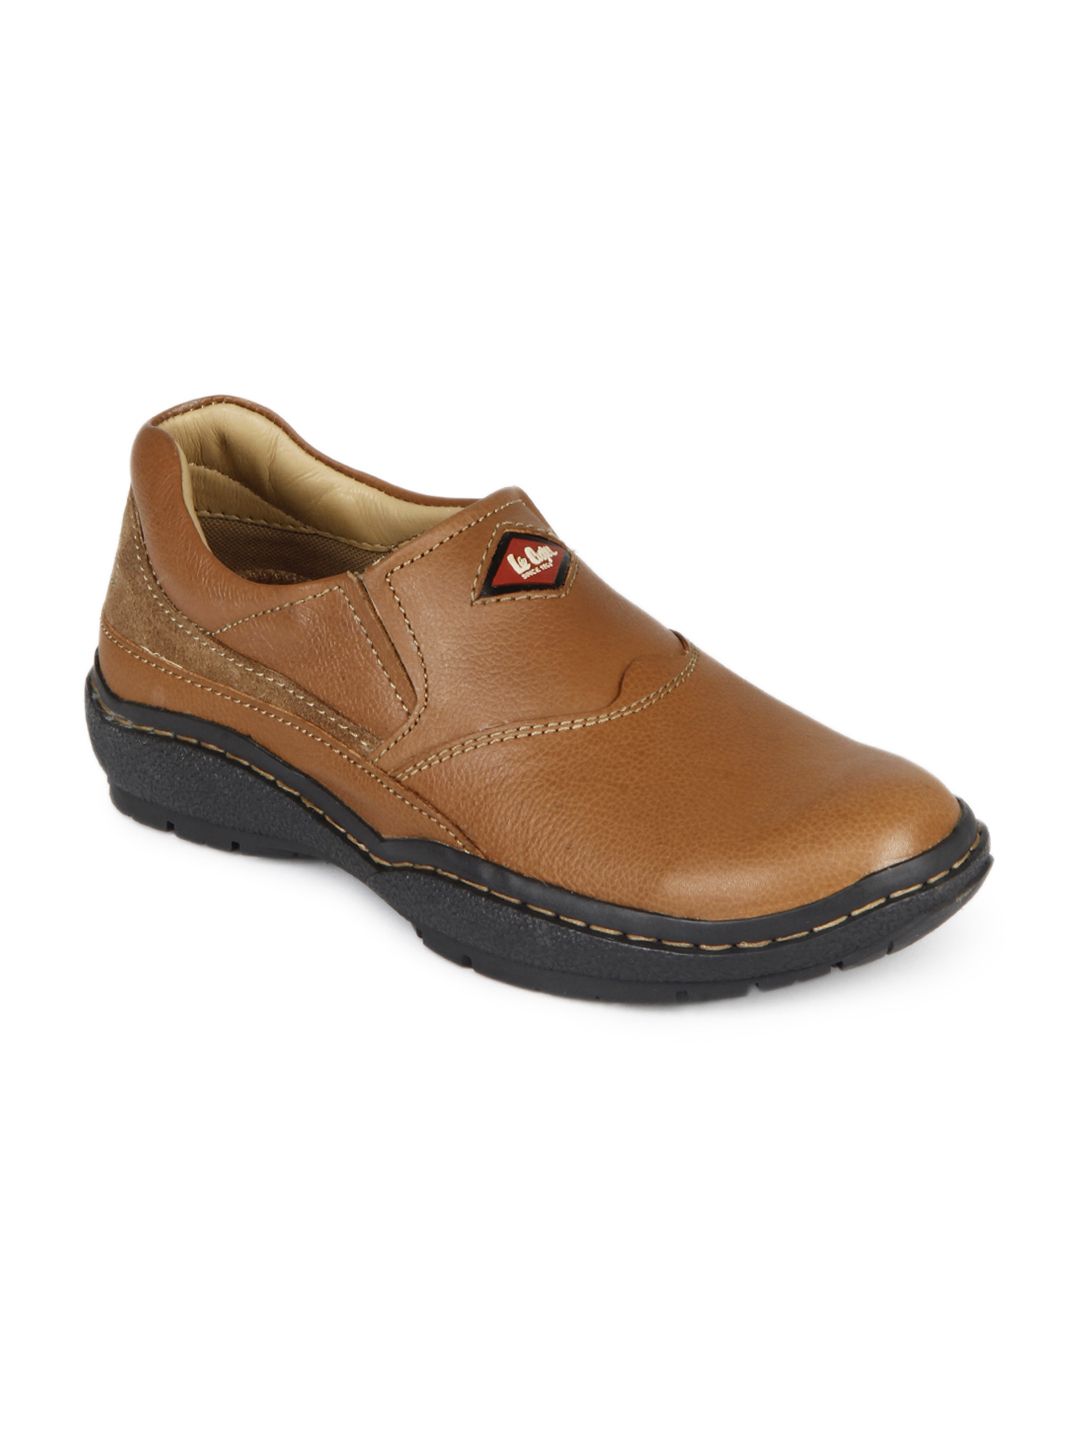 88  Buy lee cooper casual shoes Combine with Best Outfit